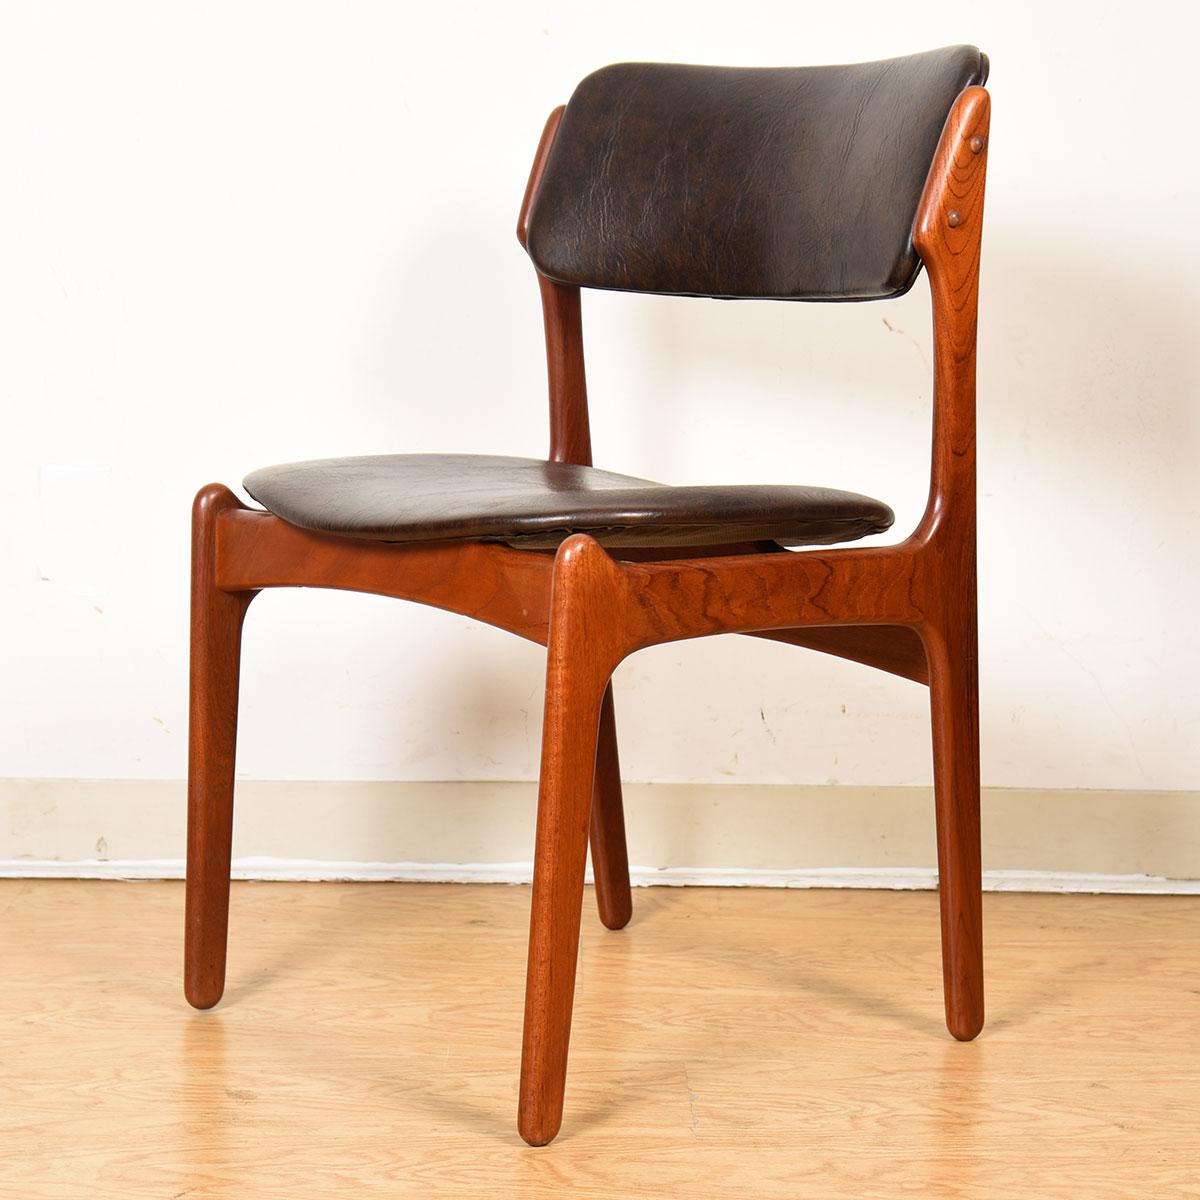 20th Century Pair of Danish Teak Dining Chairs in Chocolate Brown by Erik Buch For Sale